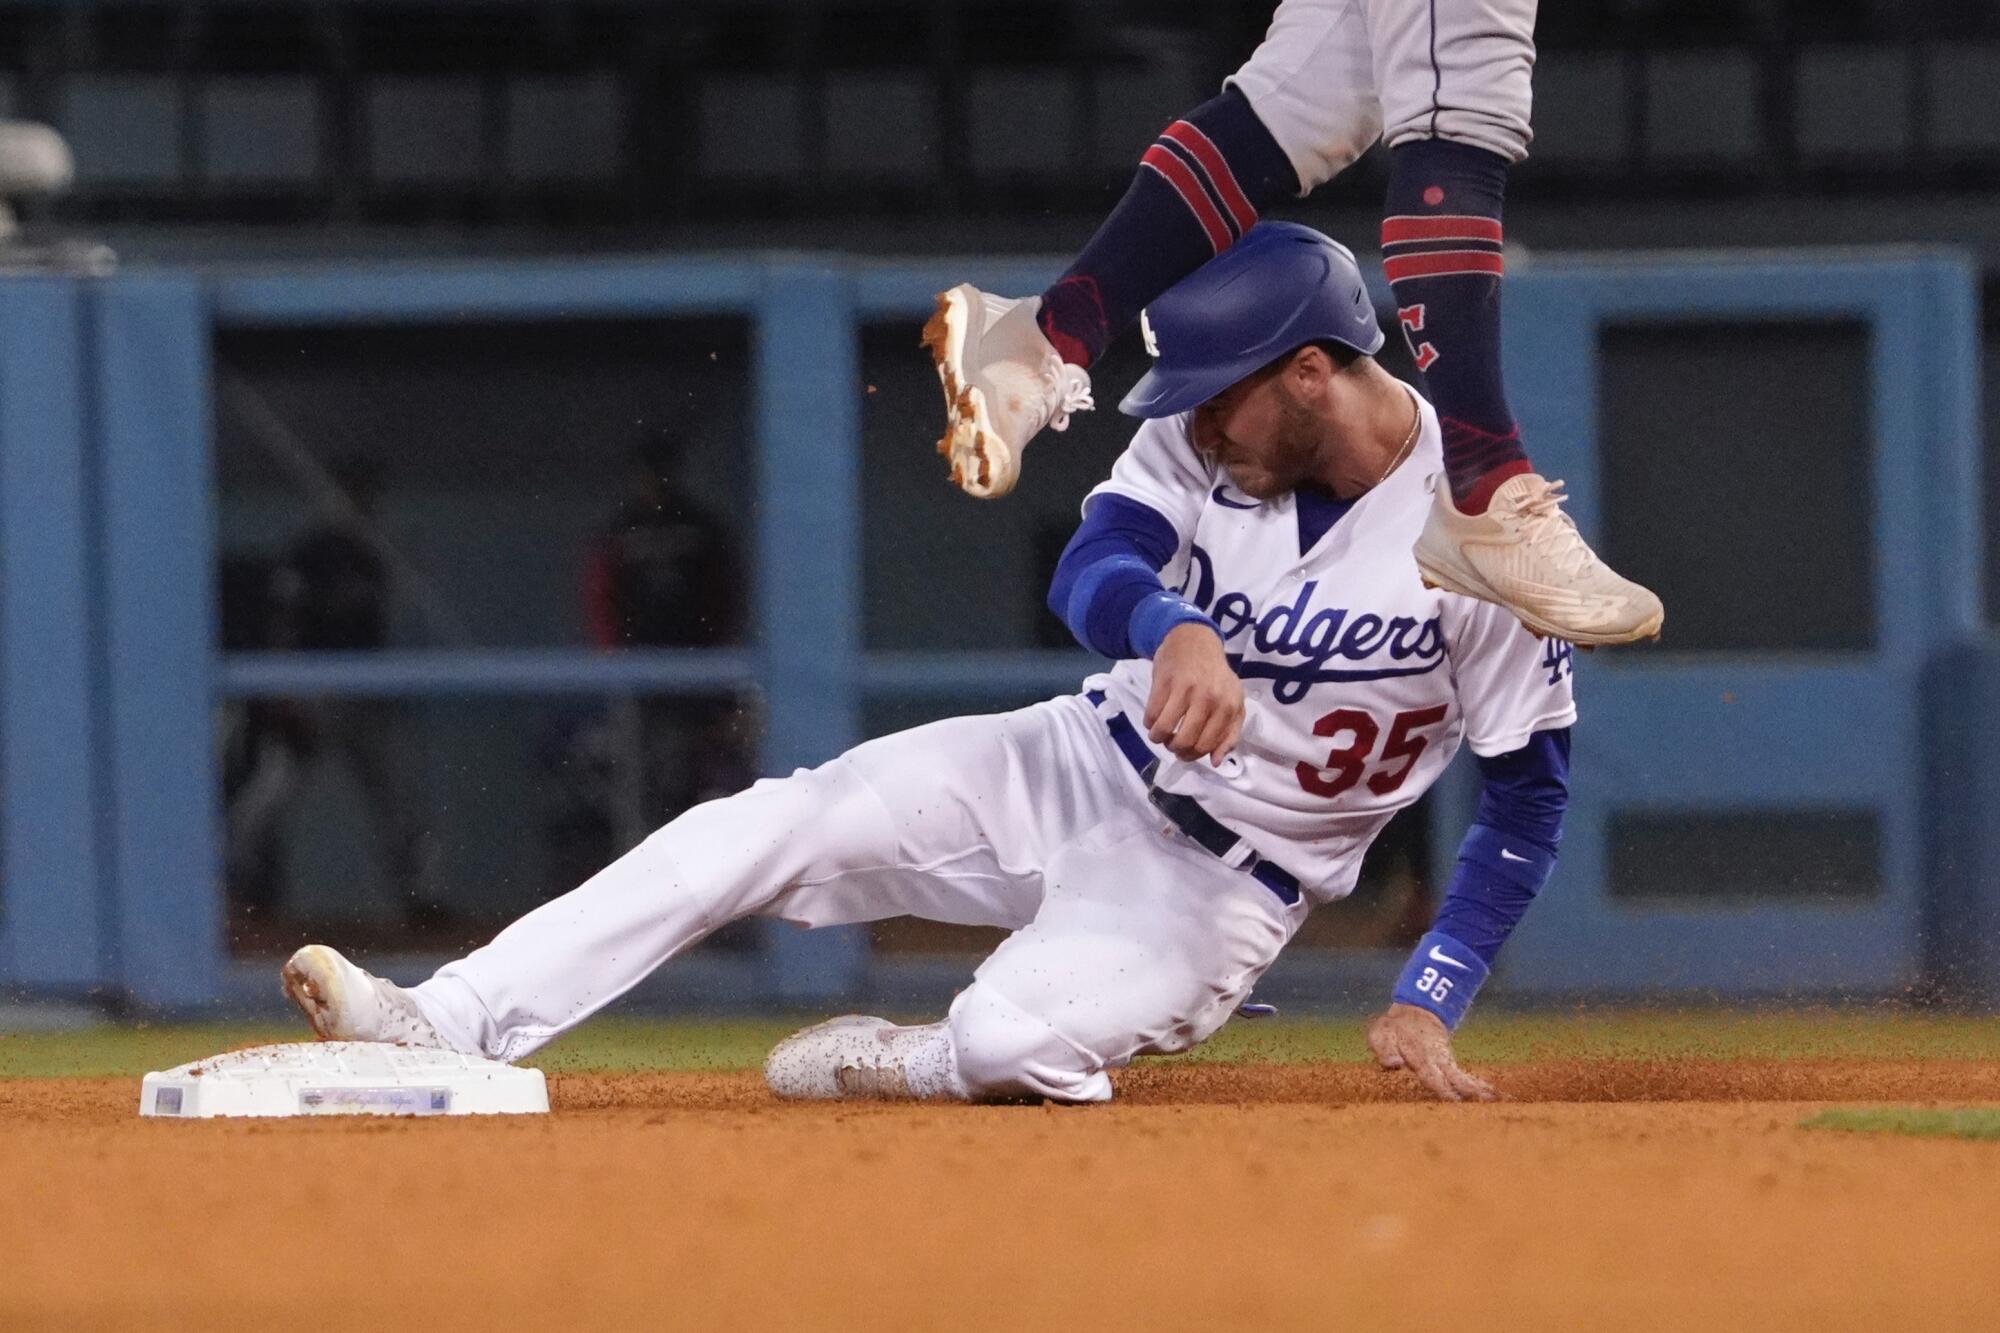 Dodgers' shortstop solutions after Gavin Lux's season-ending injury  National News - Bally Sports